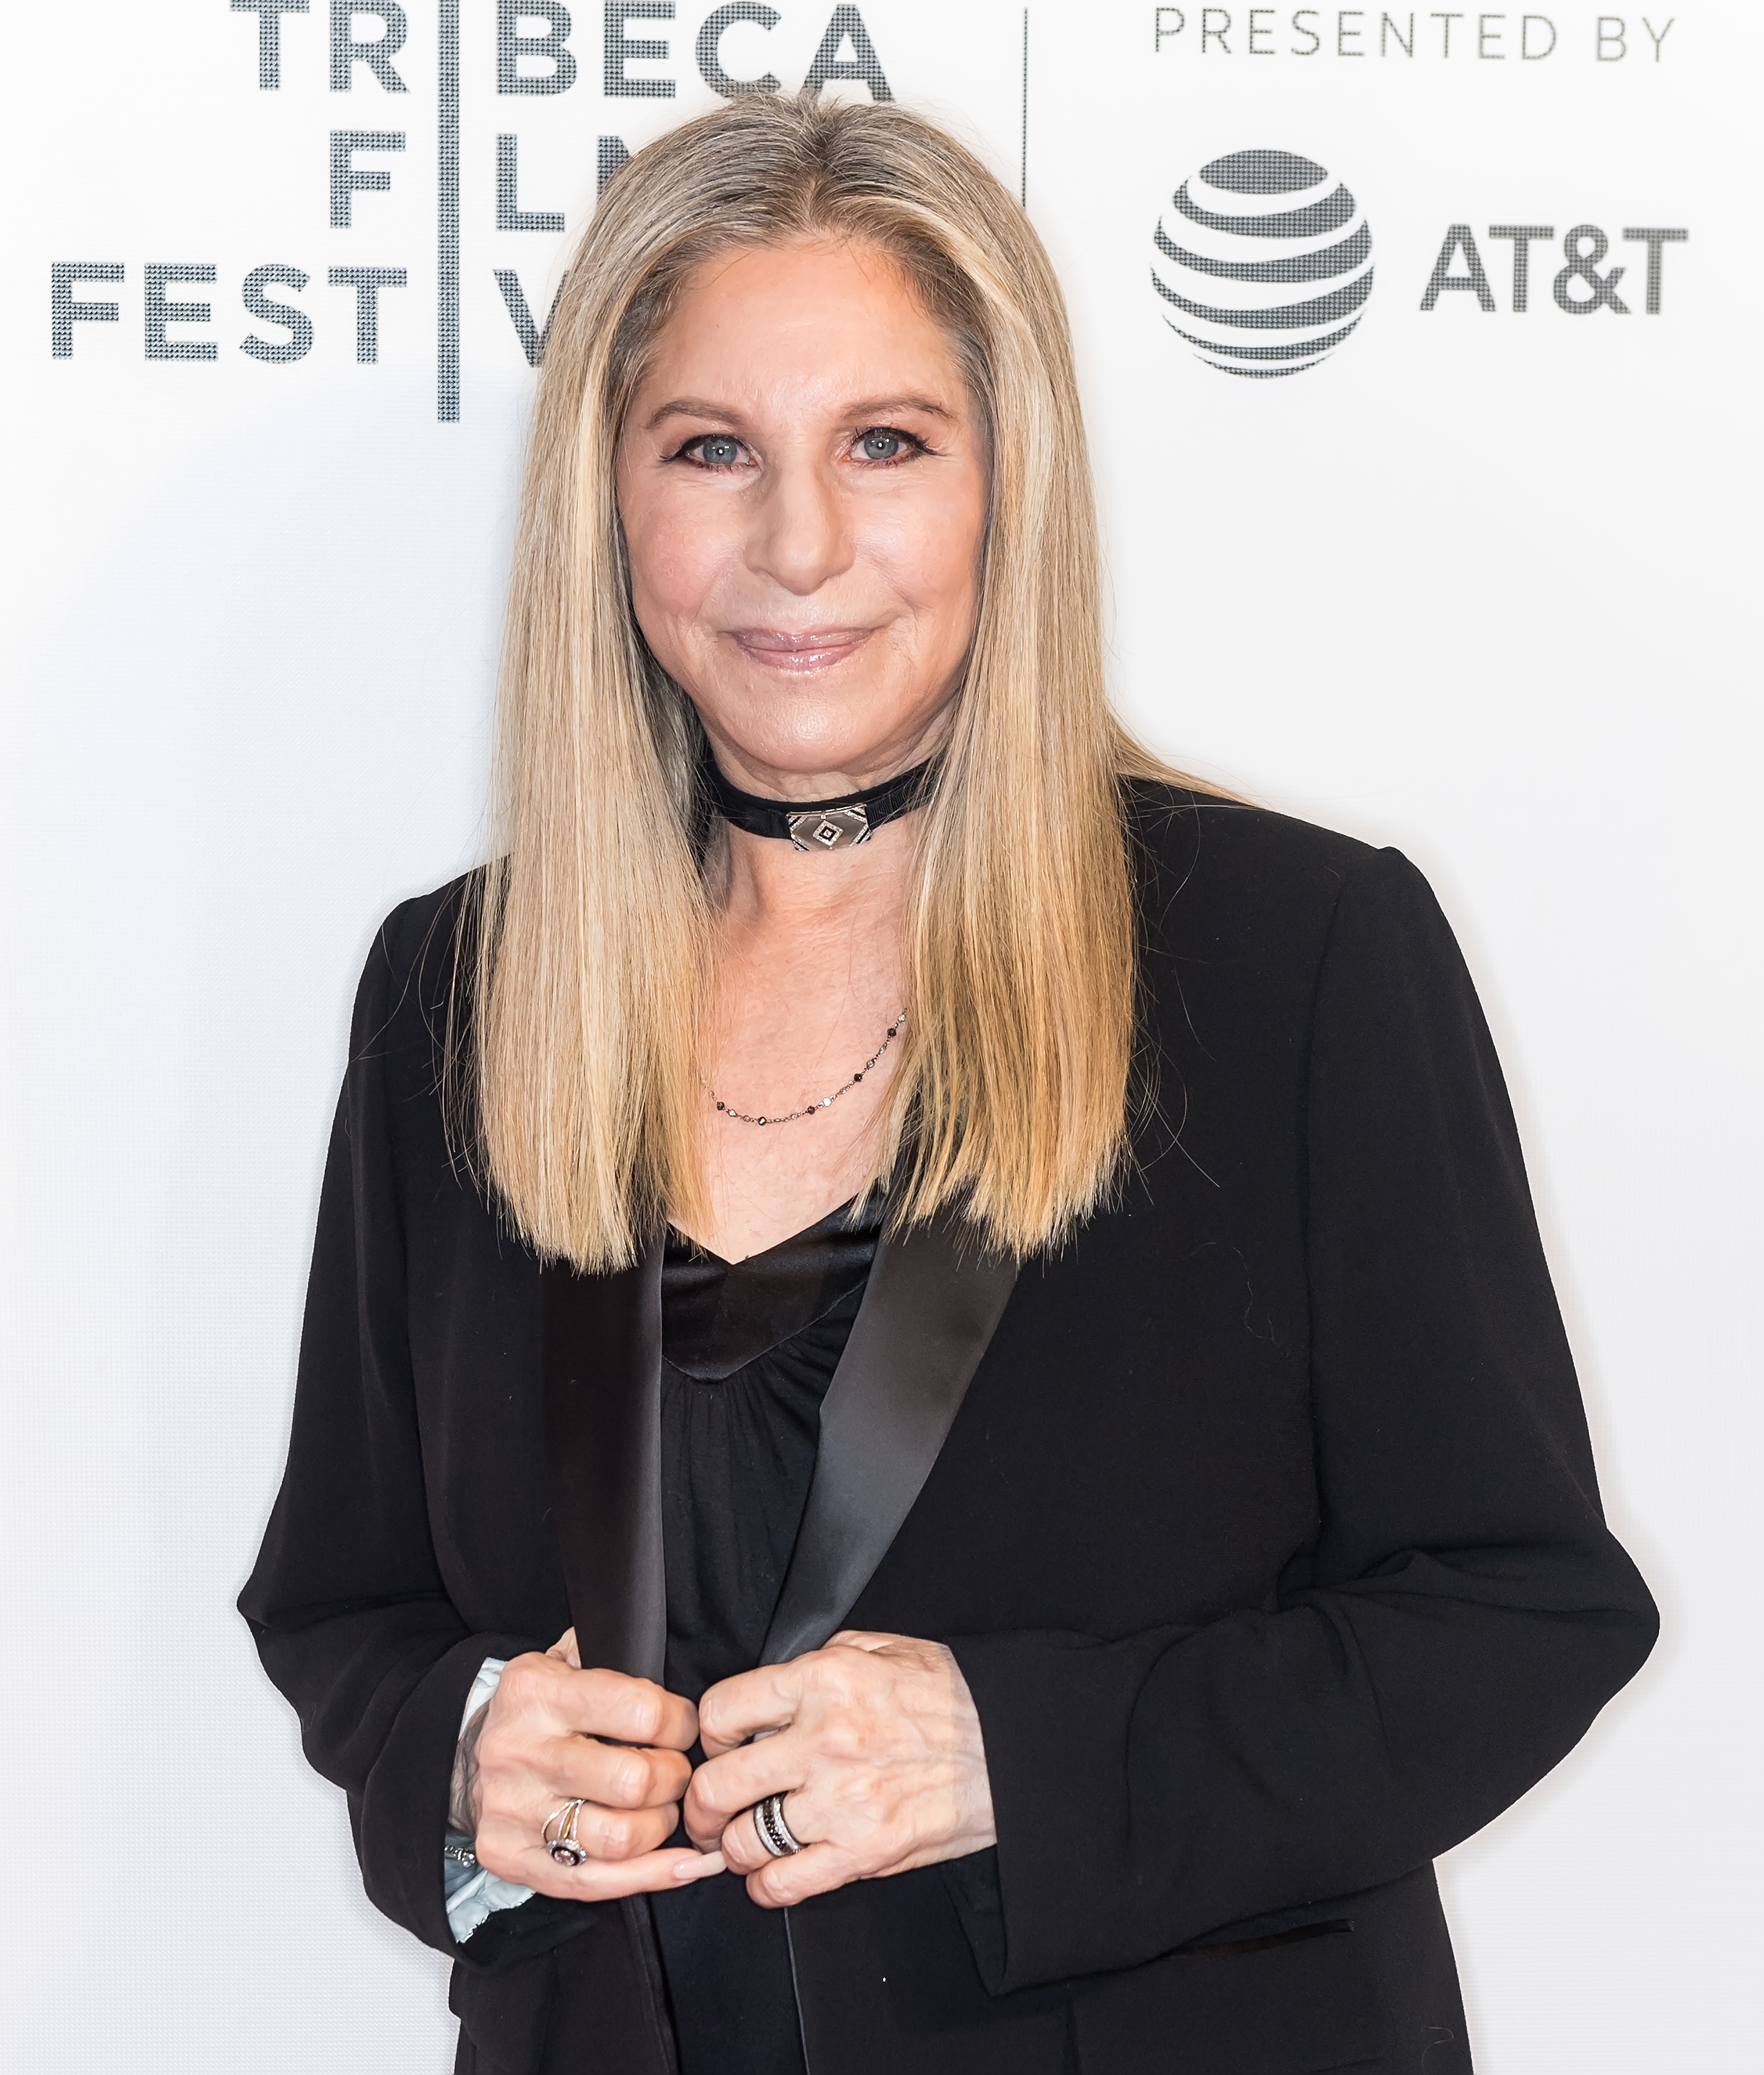 Barbra Streisand wearing a black outfit with necklace, posing at the Tribeca Film Festival